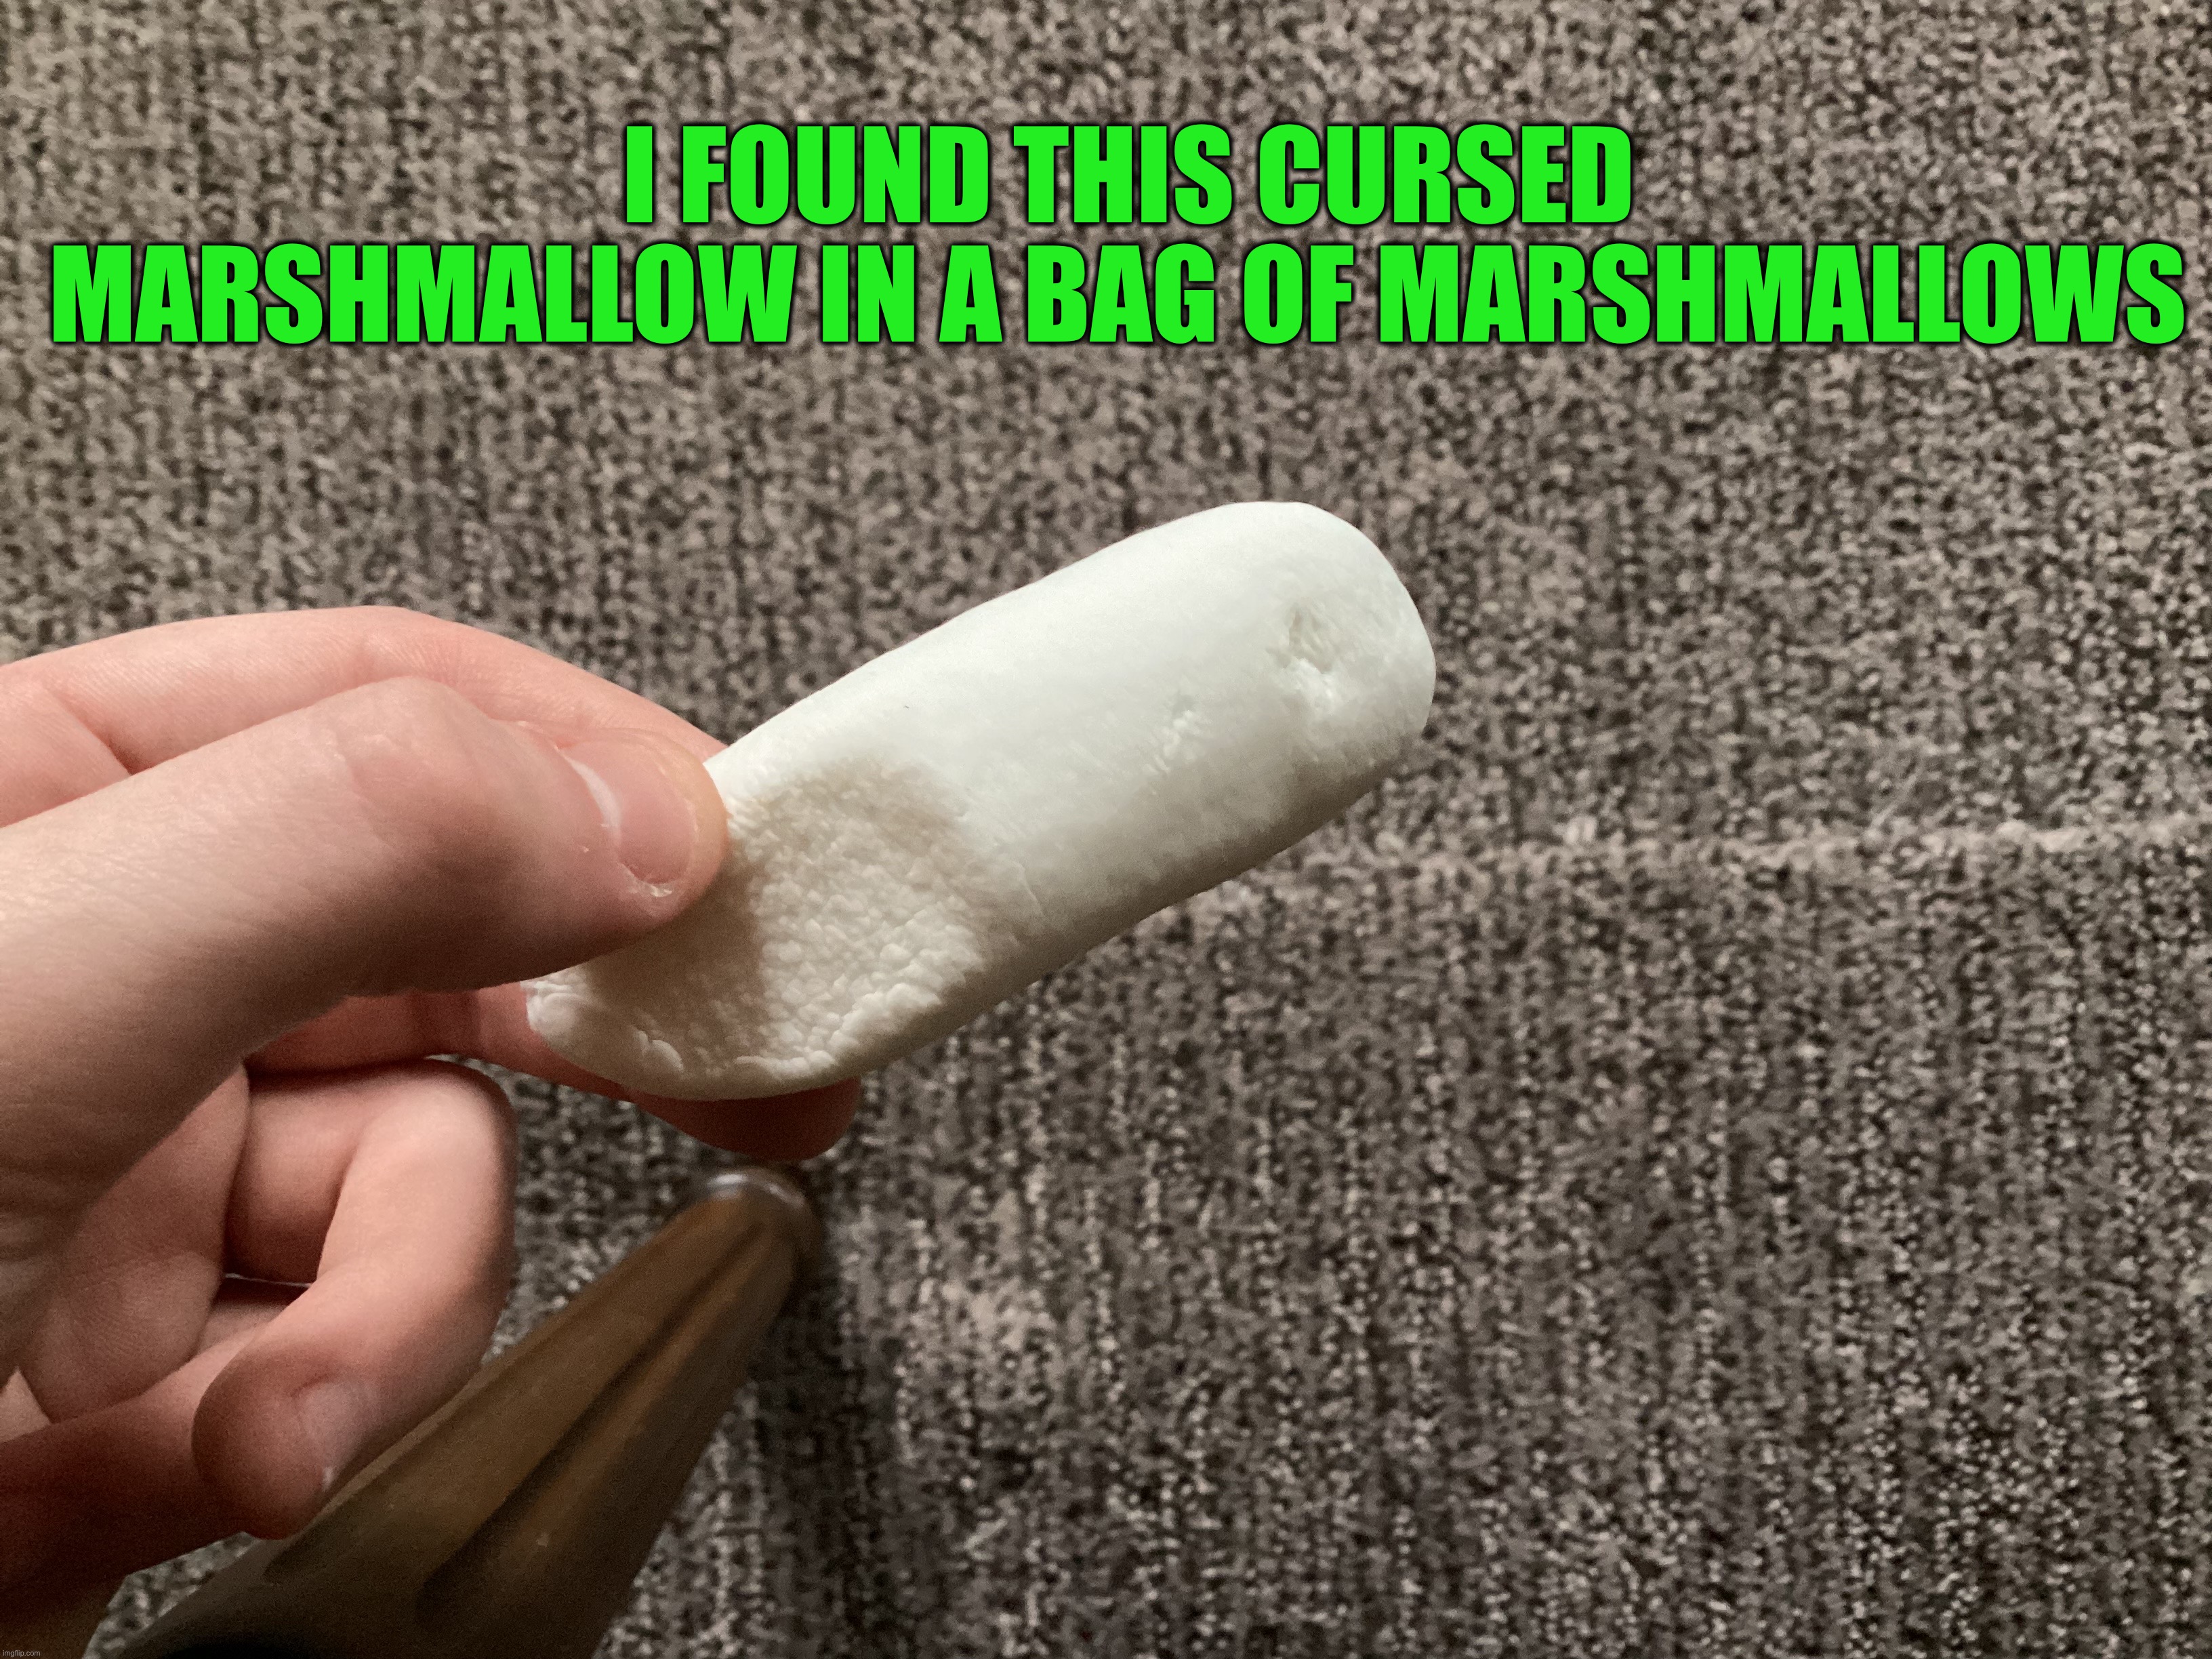 Long ahh marshmallow | I FOUND THIS CURSED MARSHMALLOW IN A BAG OF MARSHMALLOWS | image tagged in memes,funny,cursed image | made w/ Imgflip meme maker